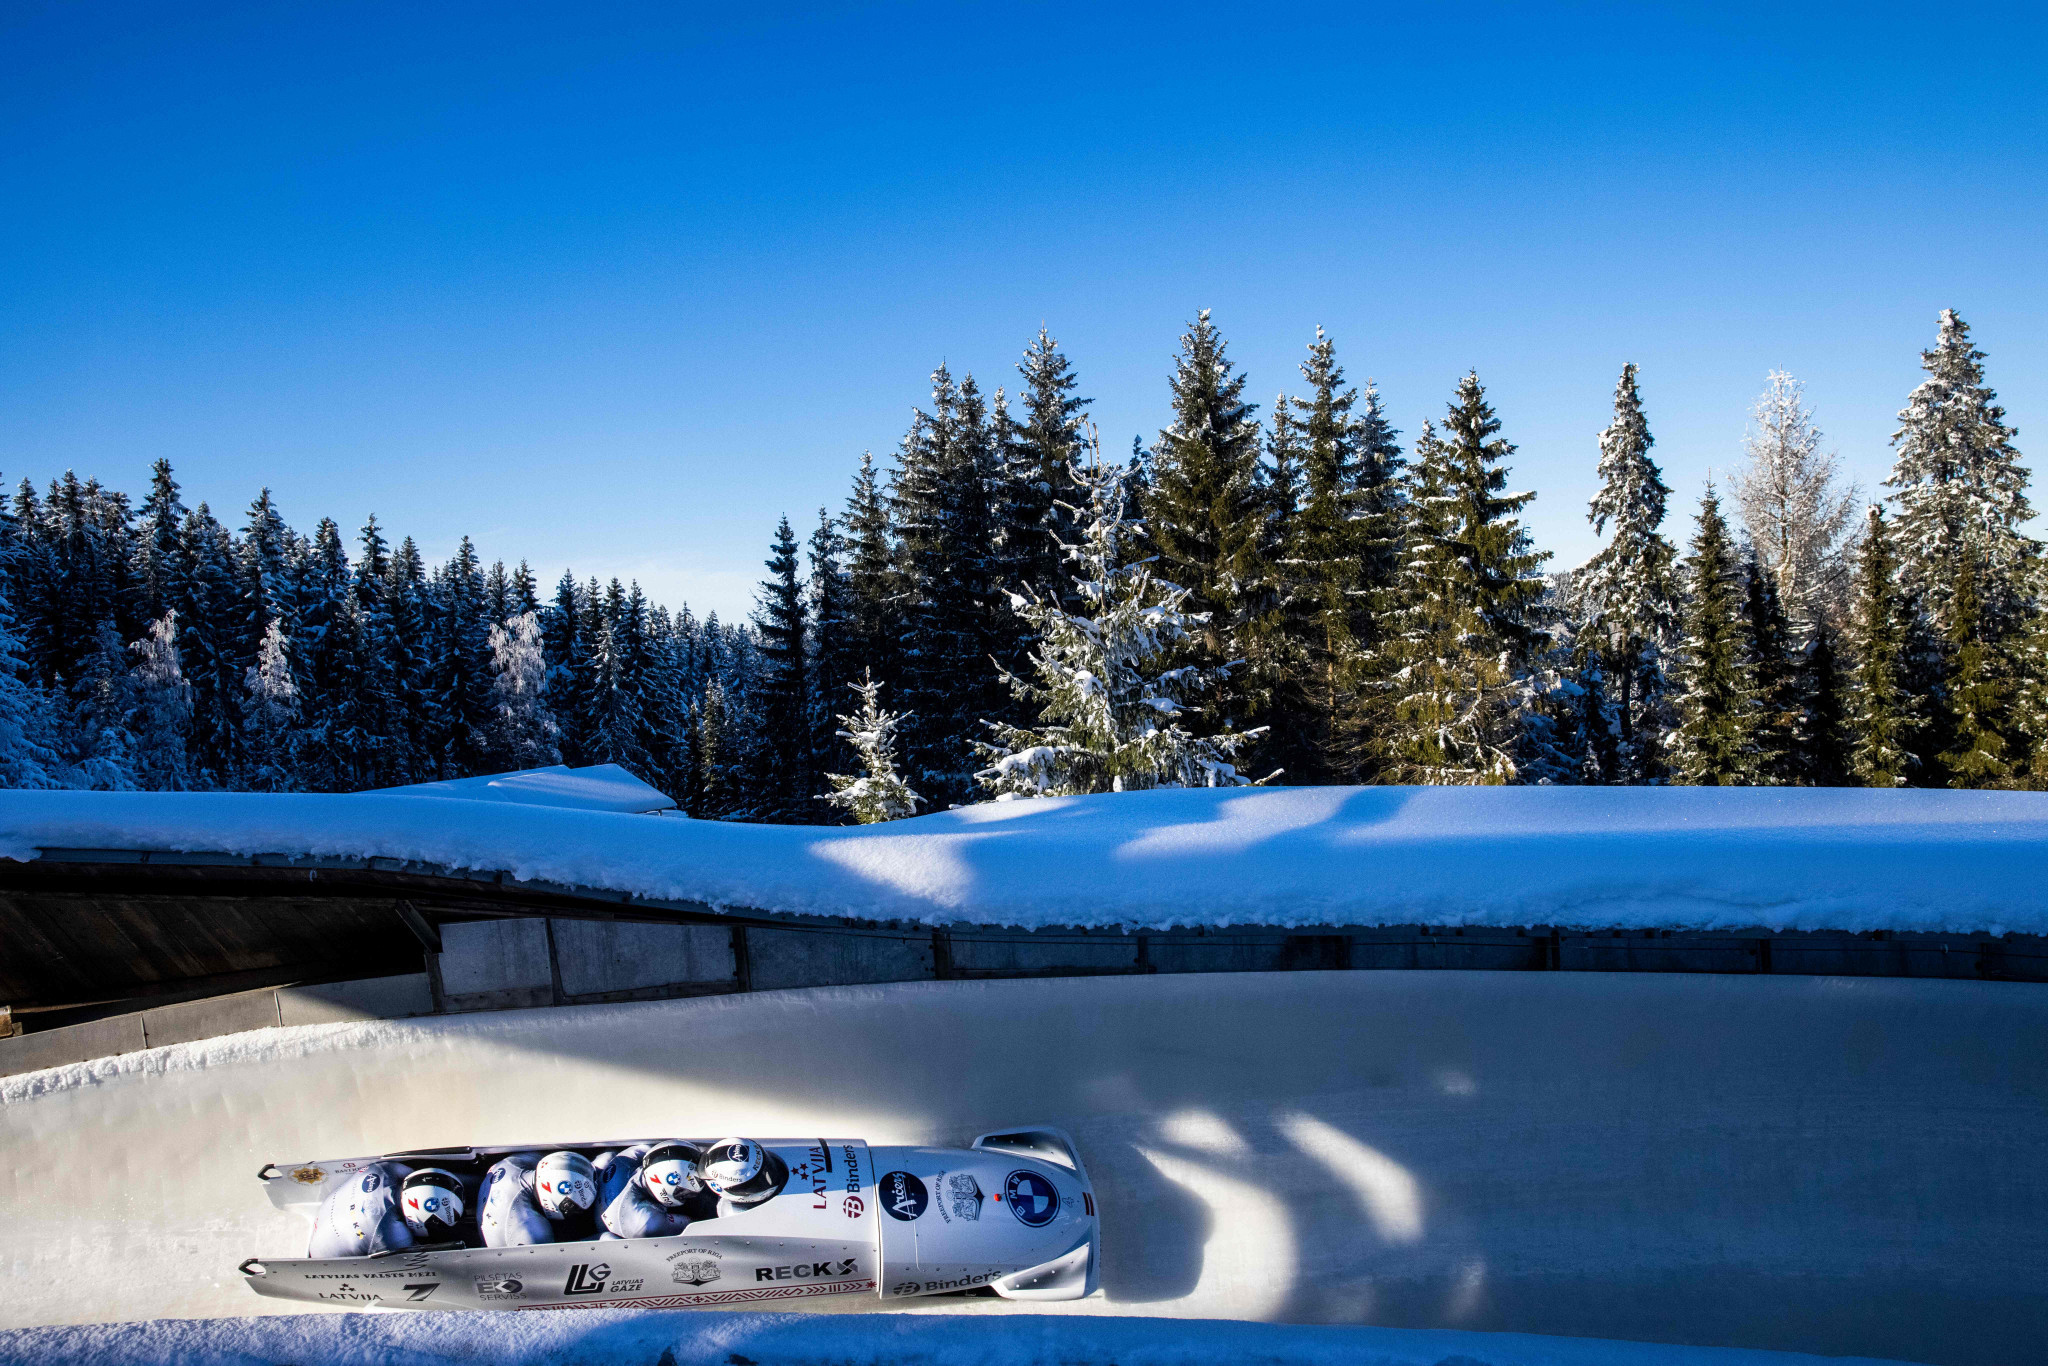 Altenberg will host the third IBSF World Cup event of the season ©Getty Images